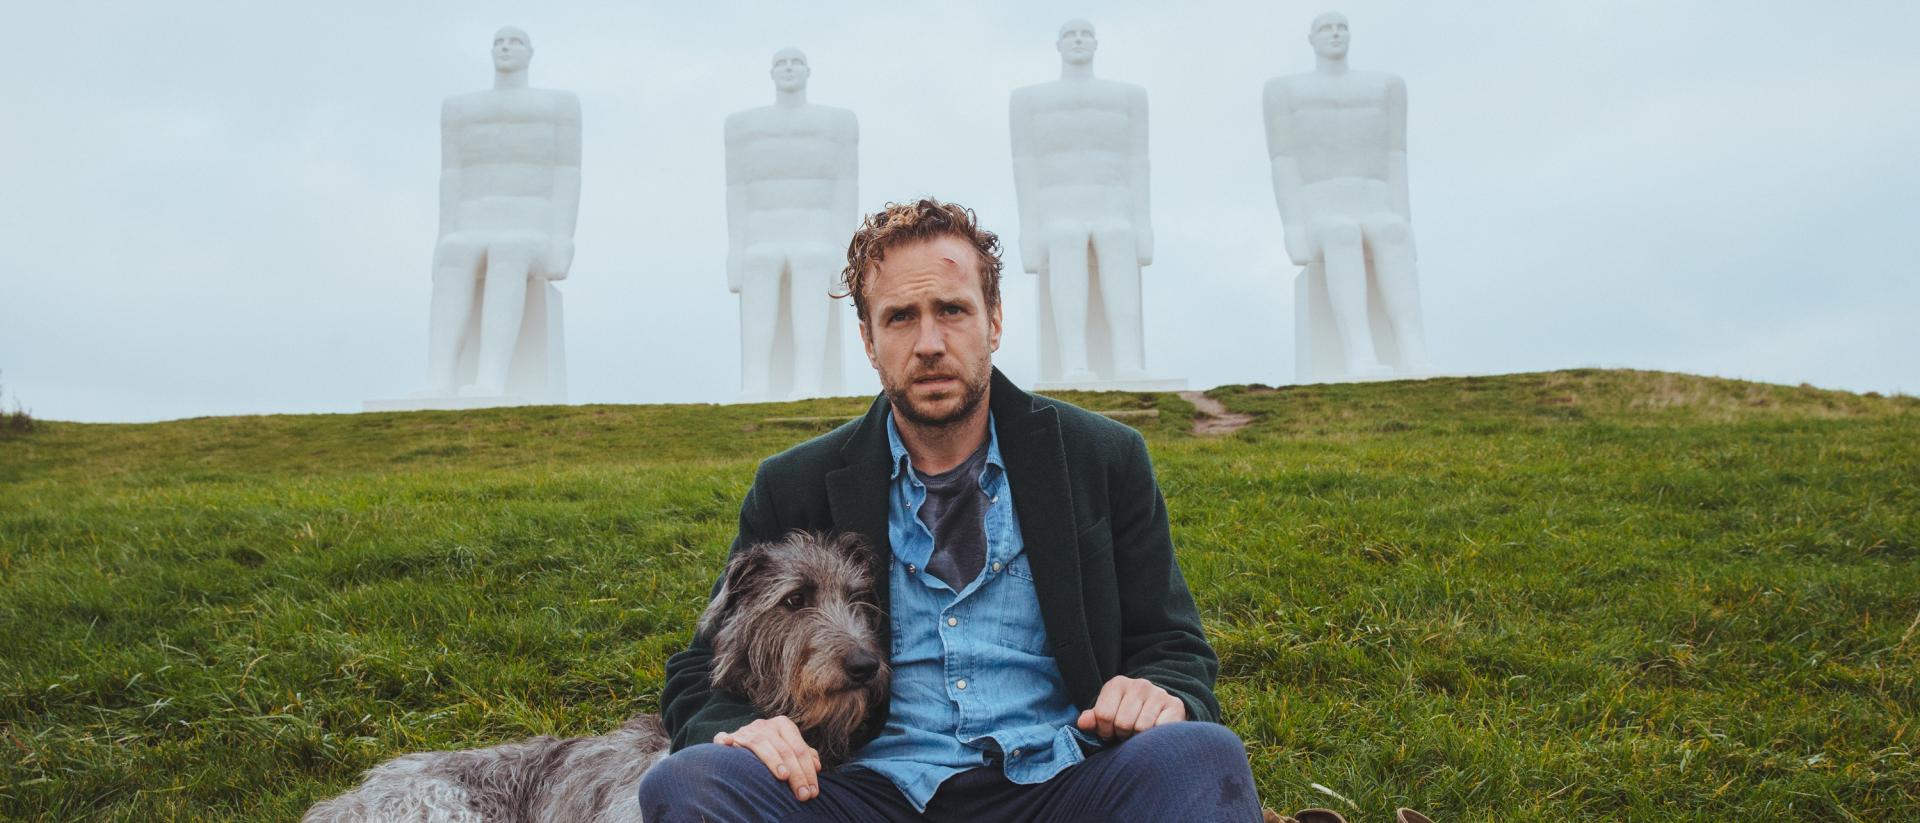 Rafe Spall and his dog in Denmark